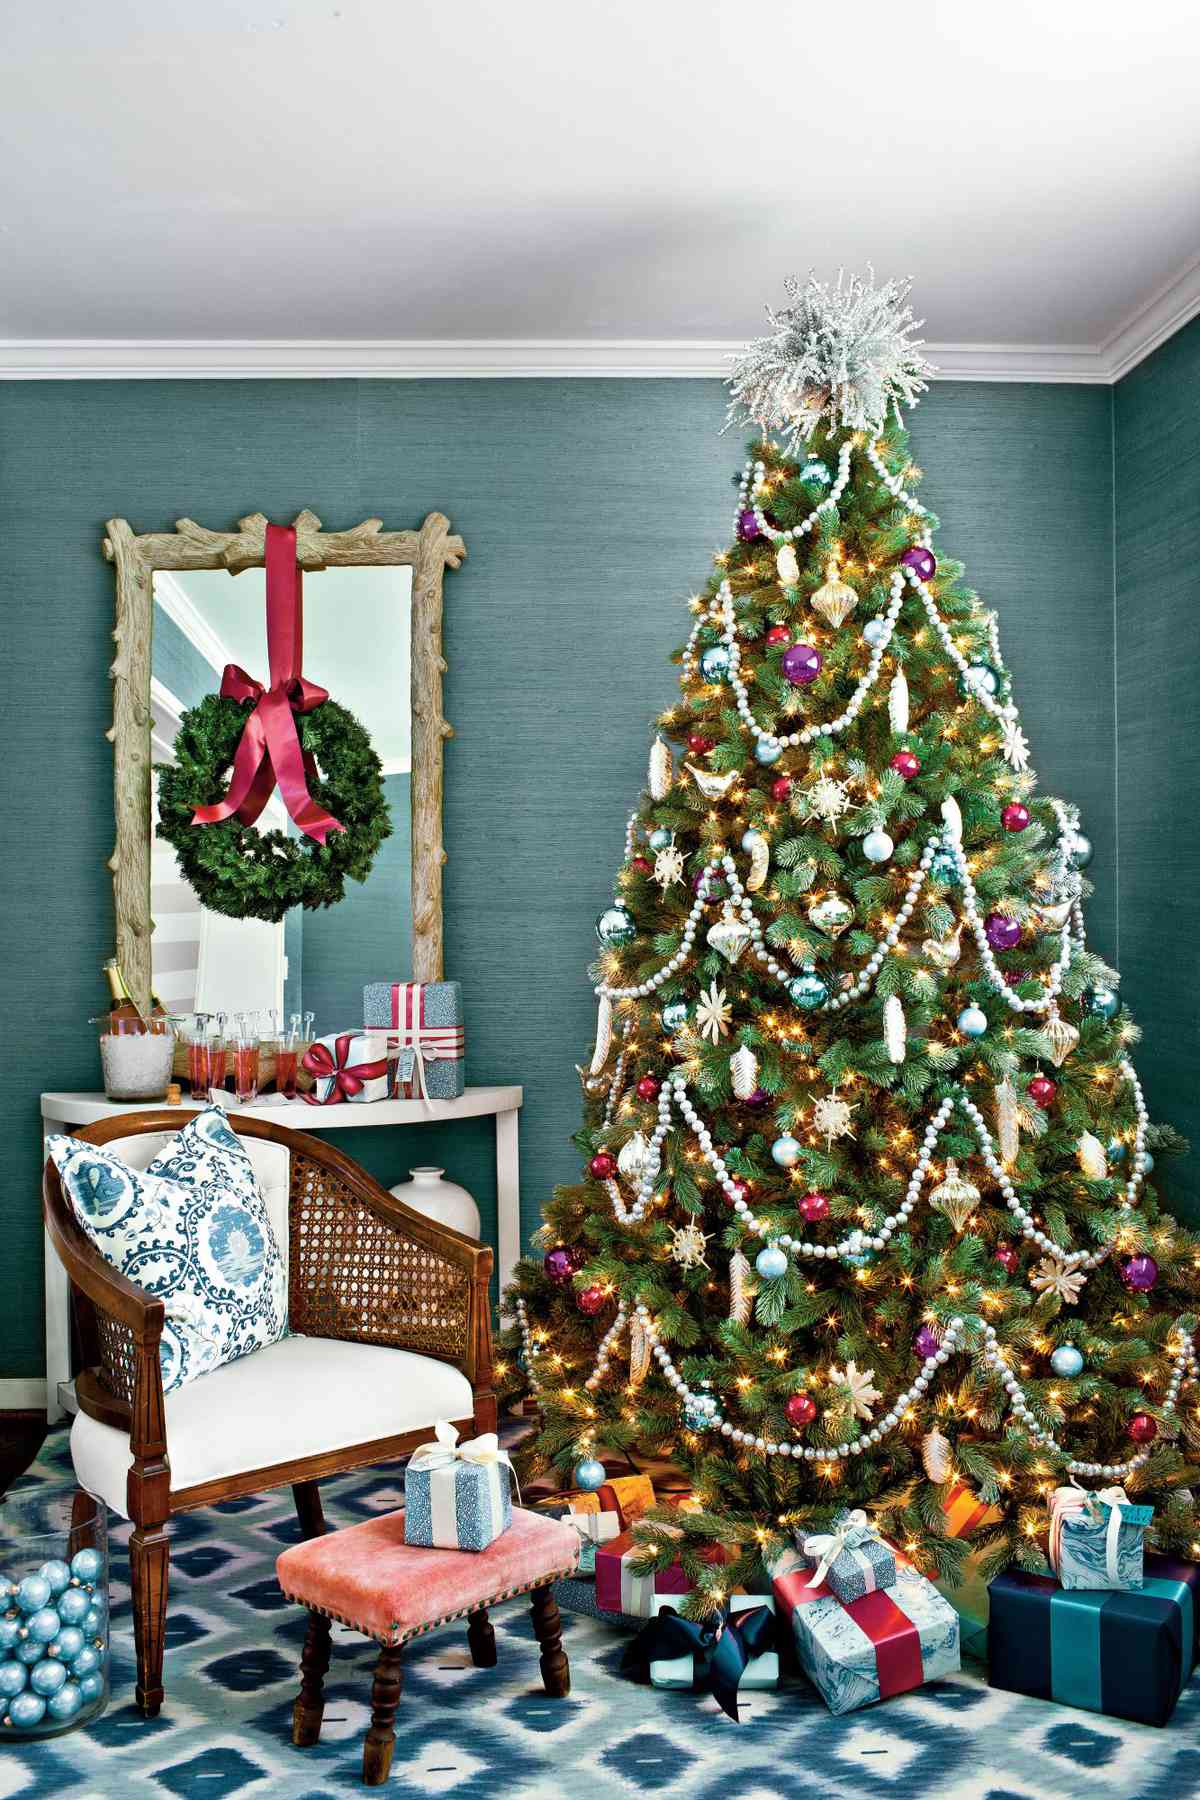 These Christmas Decorating Ideas Will Inspire You to Bring the Beauty of the Season Home